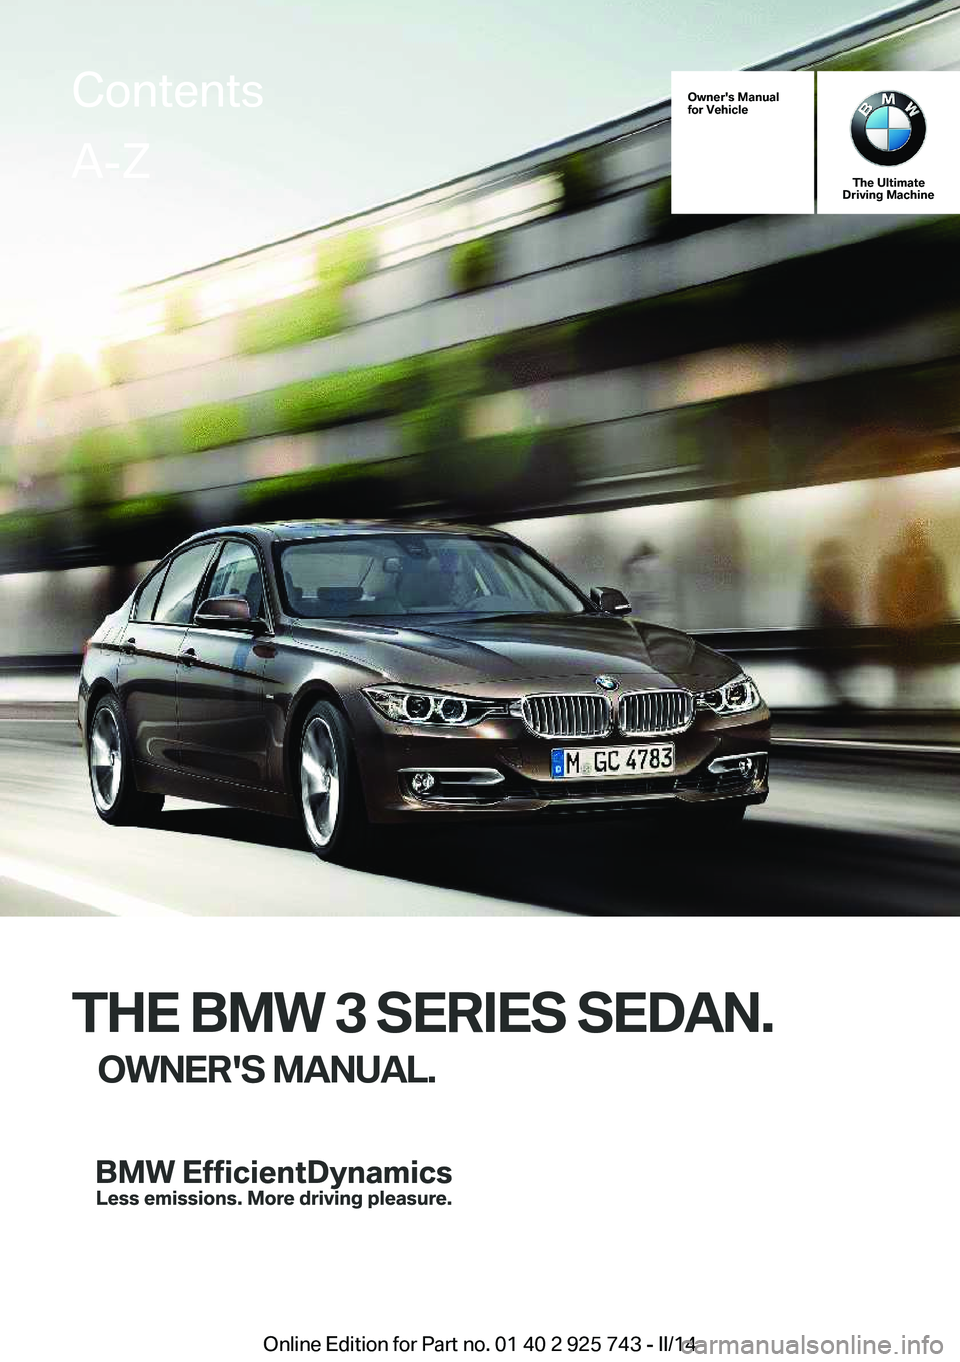 BMW 328I 2014  Owners Manual Owner's Manual
for Vehicle
The Ultimate
Driving Machine
THE BMW 3 SERIES SEDAN.
OWNER'S MANUAL.
ContentsA-Z
Online Edition for Part no. 01 40 2 925 743 - II/14   